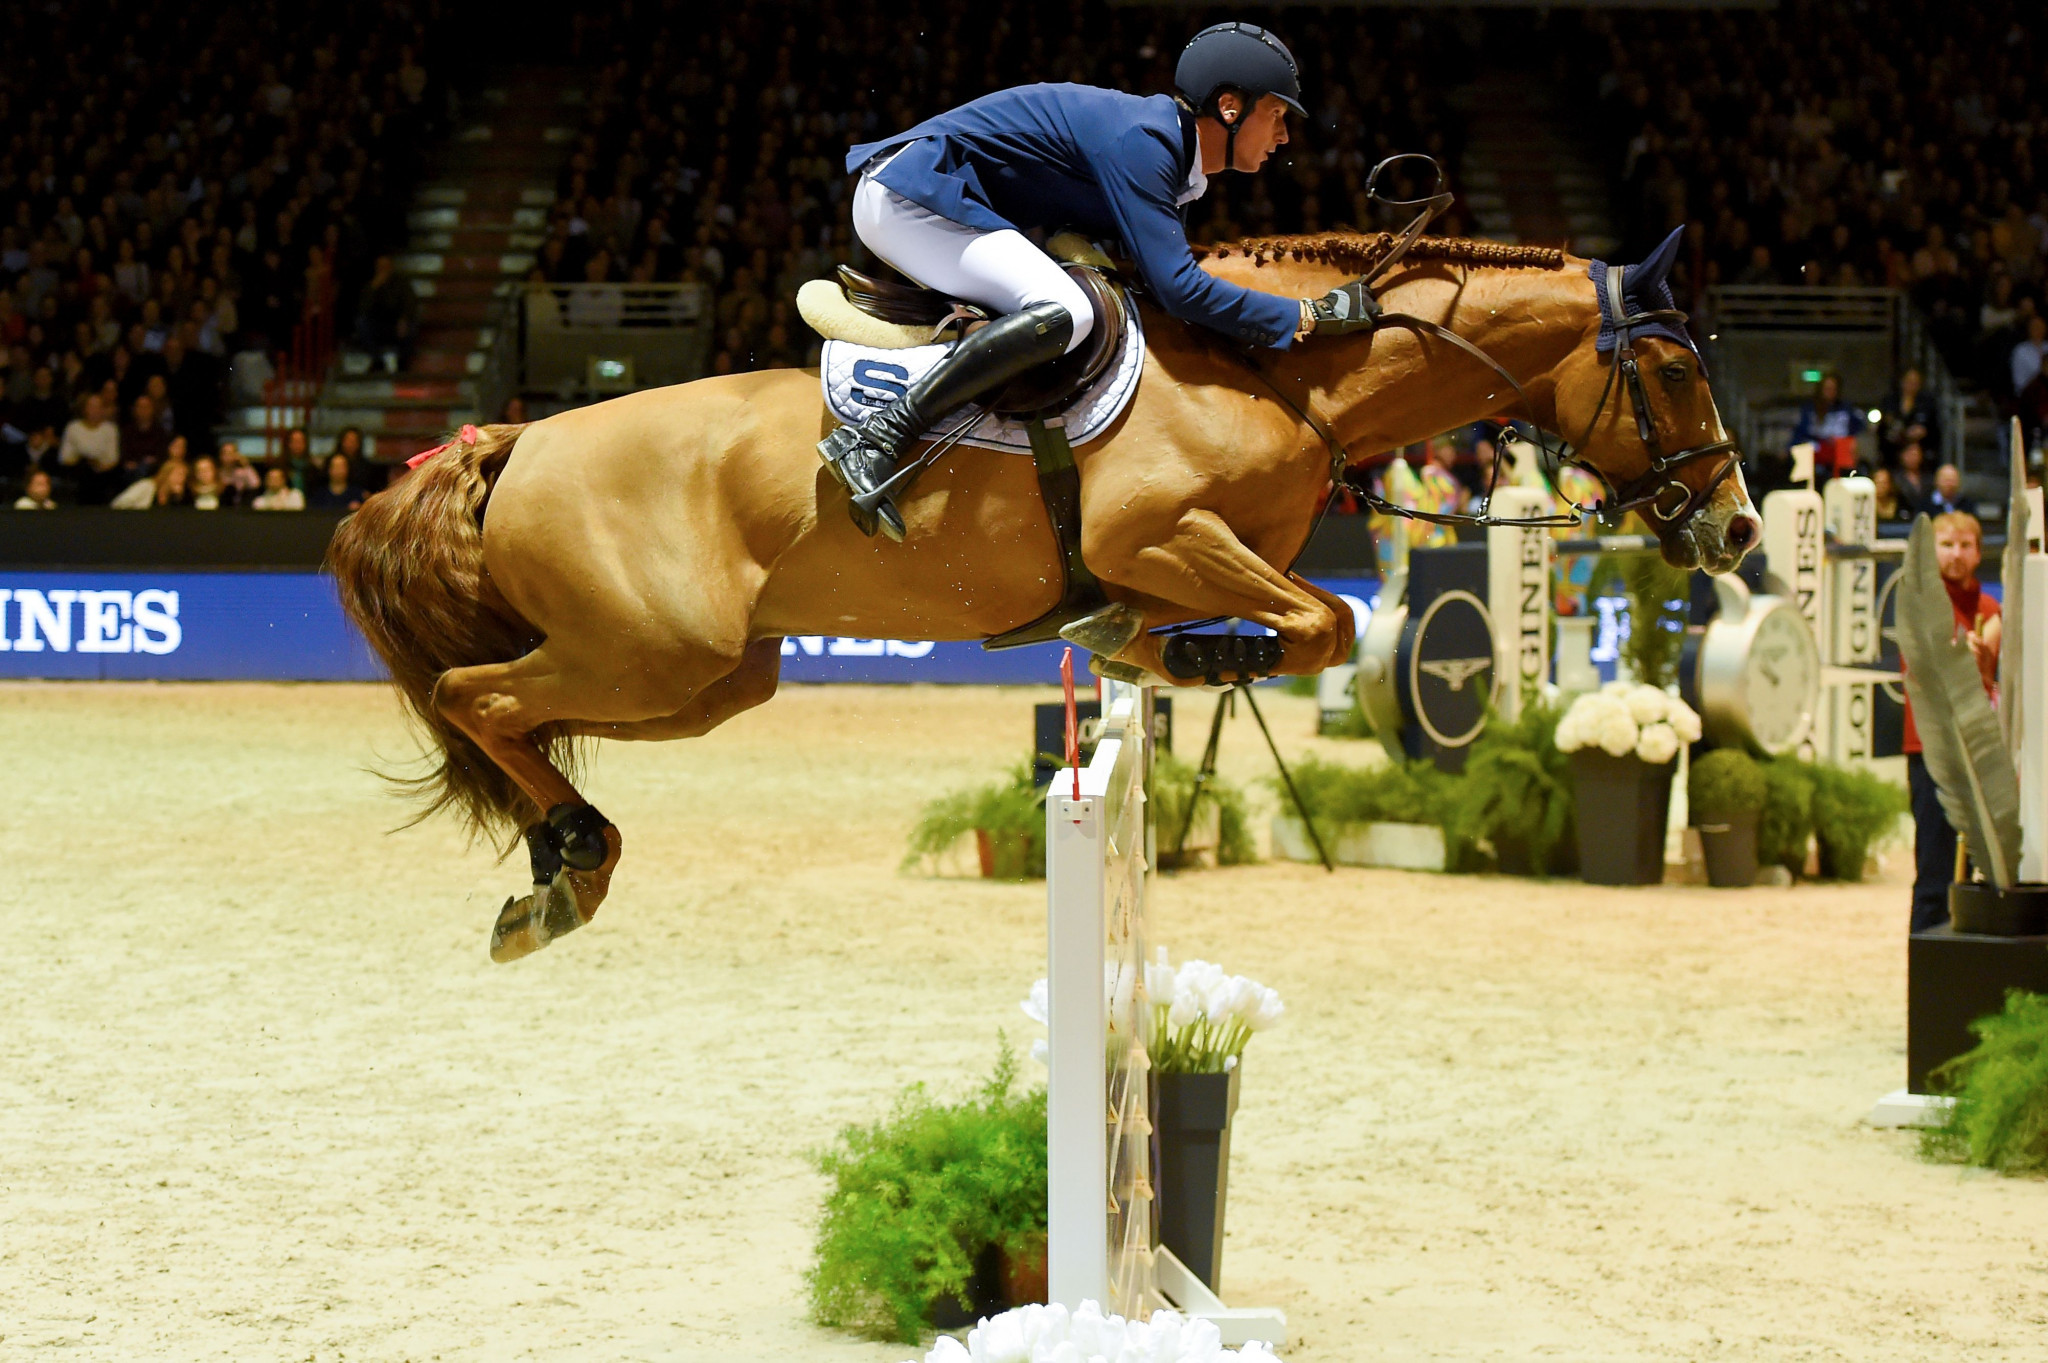 FEI Jumping and Dressage World Cup seasons to conclude in Gothenburg